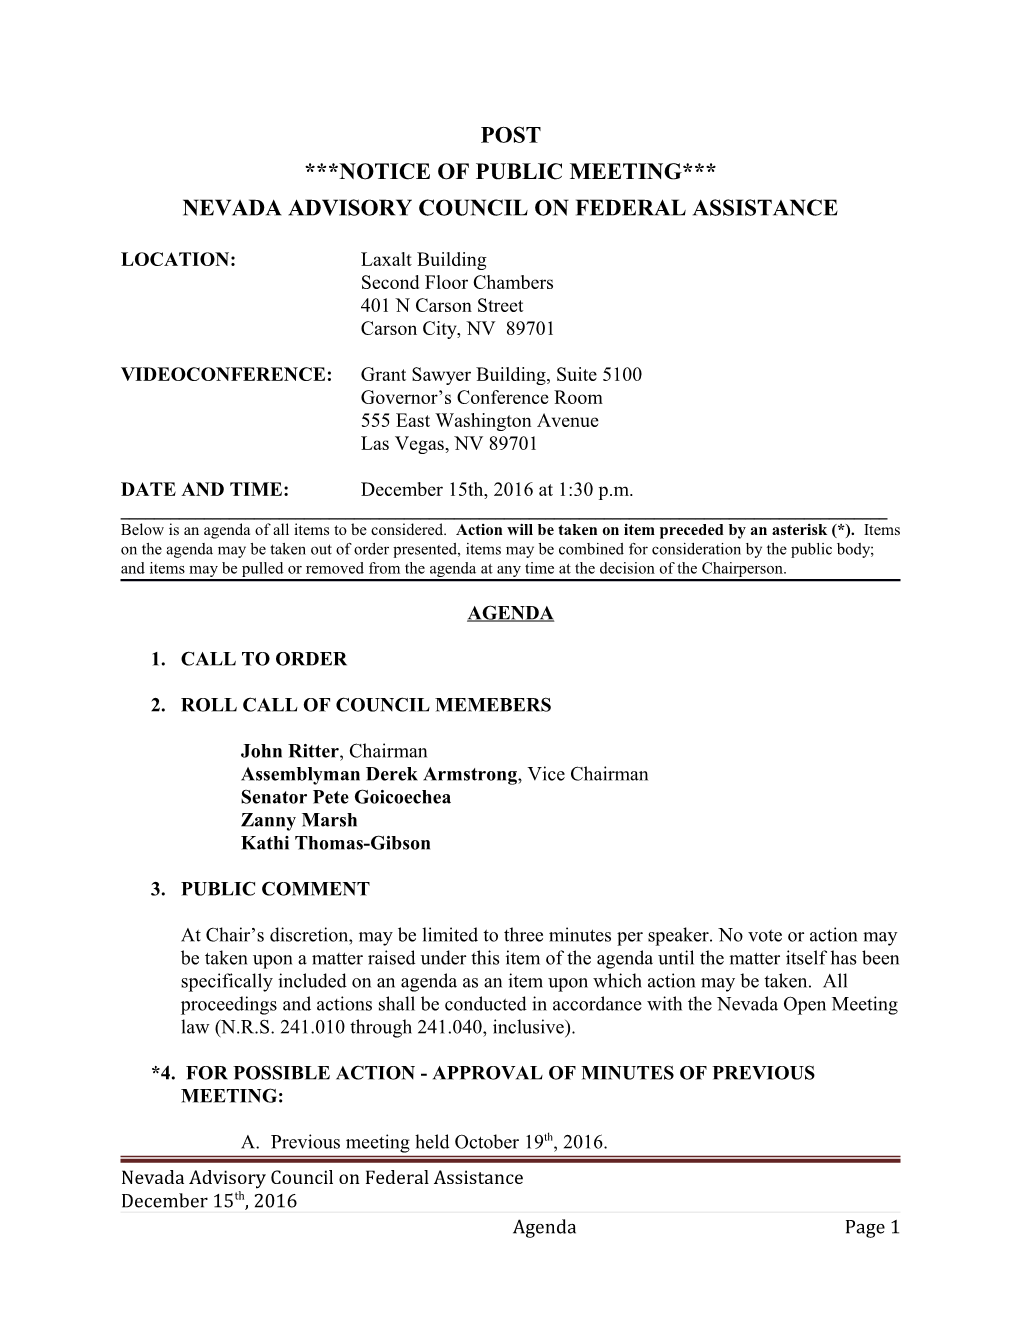 Nevada Advisory Council on Federal Assistance